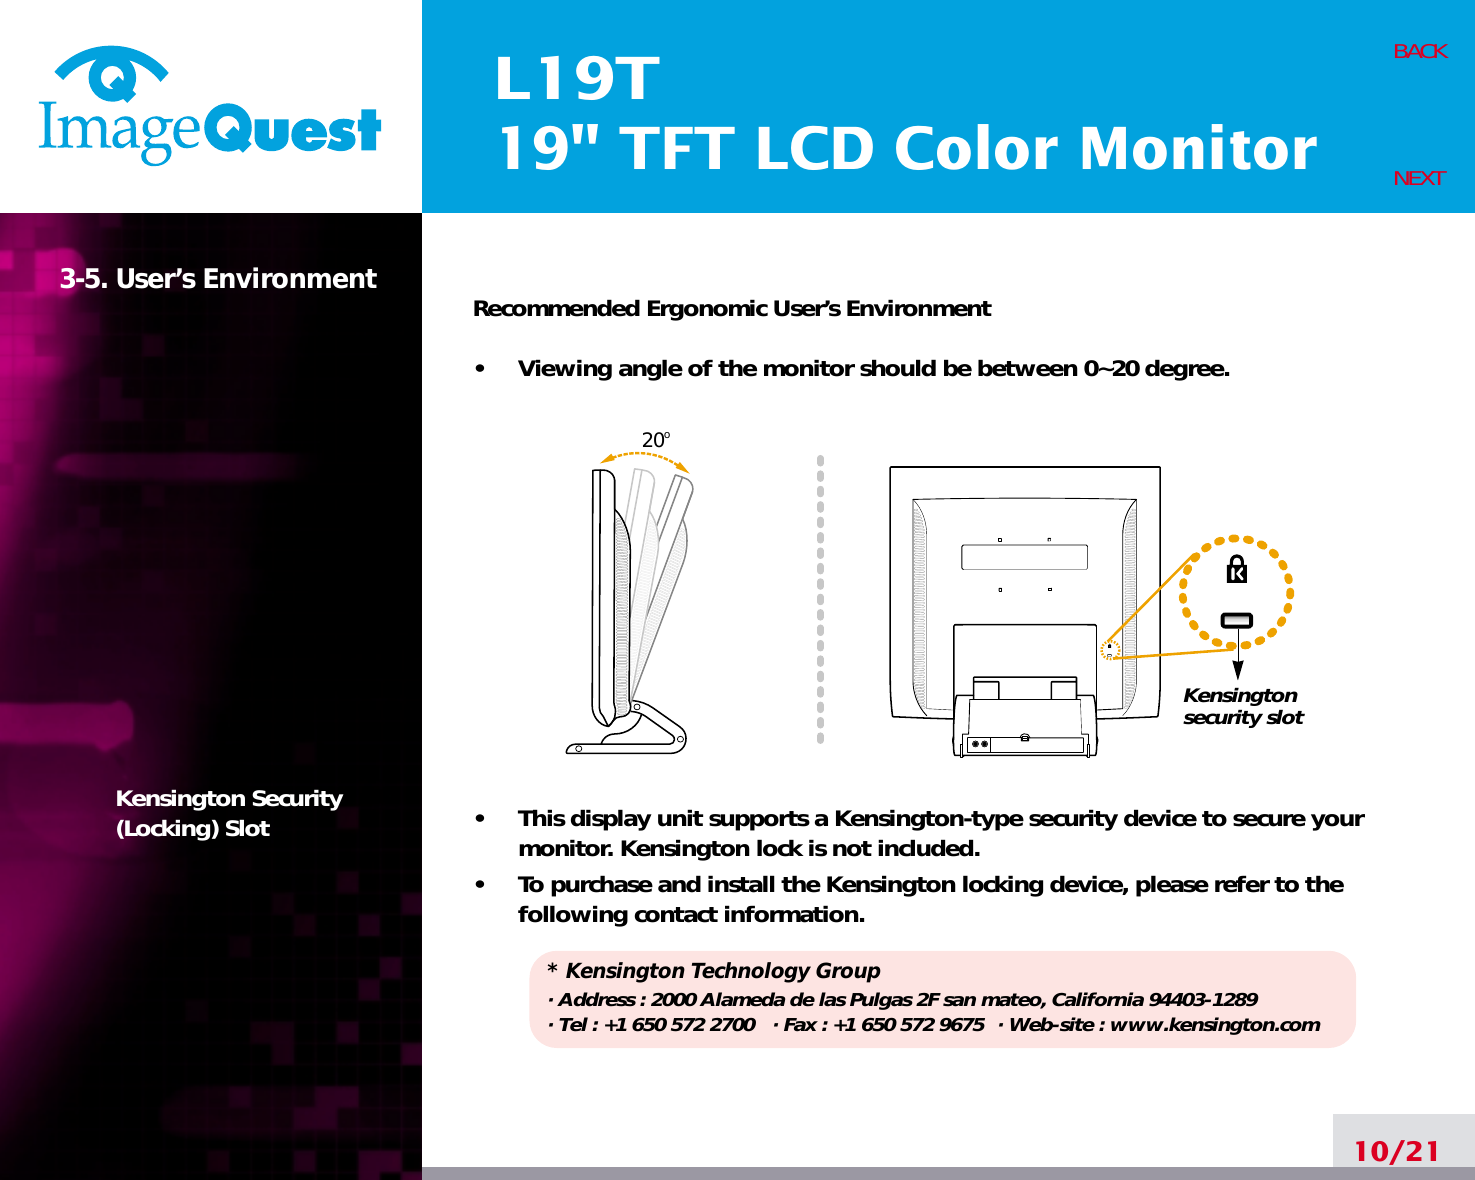 L19T19&quot; TFT LCD Color Monitor3-5. User’s EnvironmentKensington Security(Locking) SlotRecommended Ergonomic User’s Environment•     Viewing angle of the monitor should be between 0~20 degree.•     This display unit supports a Kensington-type security device to secure yourmonitor. Kensington lock is not included.•     To purchase and install the Kensington locking device, please refer to thefollowing contact information.* Kensington Technology Group· Address : 2000 Alameda de las Pulgas 2F san mateo, California 94403-1289· Tel : +1 650 572 2700 · Fax : +1 650 572 9675 · Web-site : www.kensington.com10/21BACKNEXT20oKensington security slot